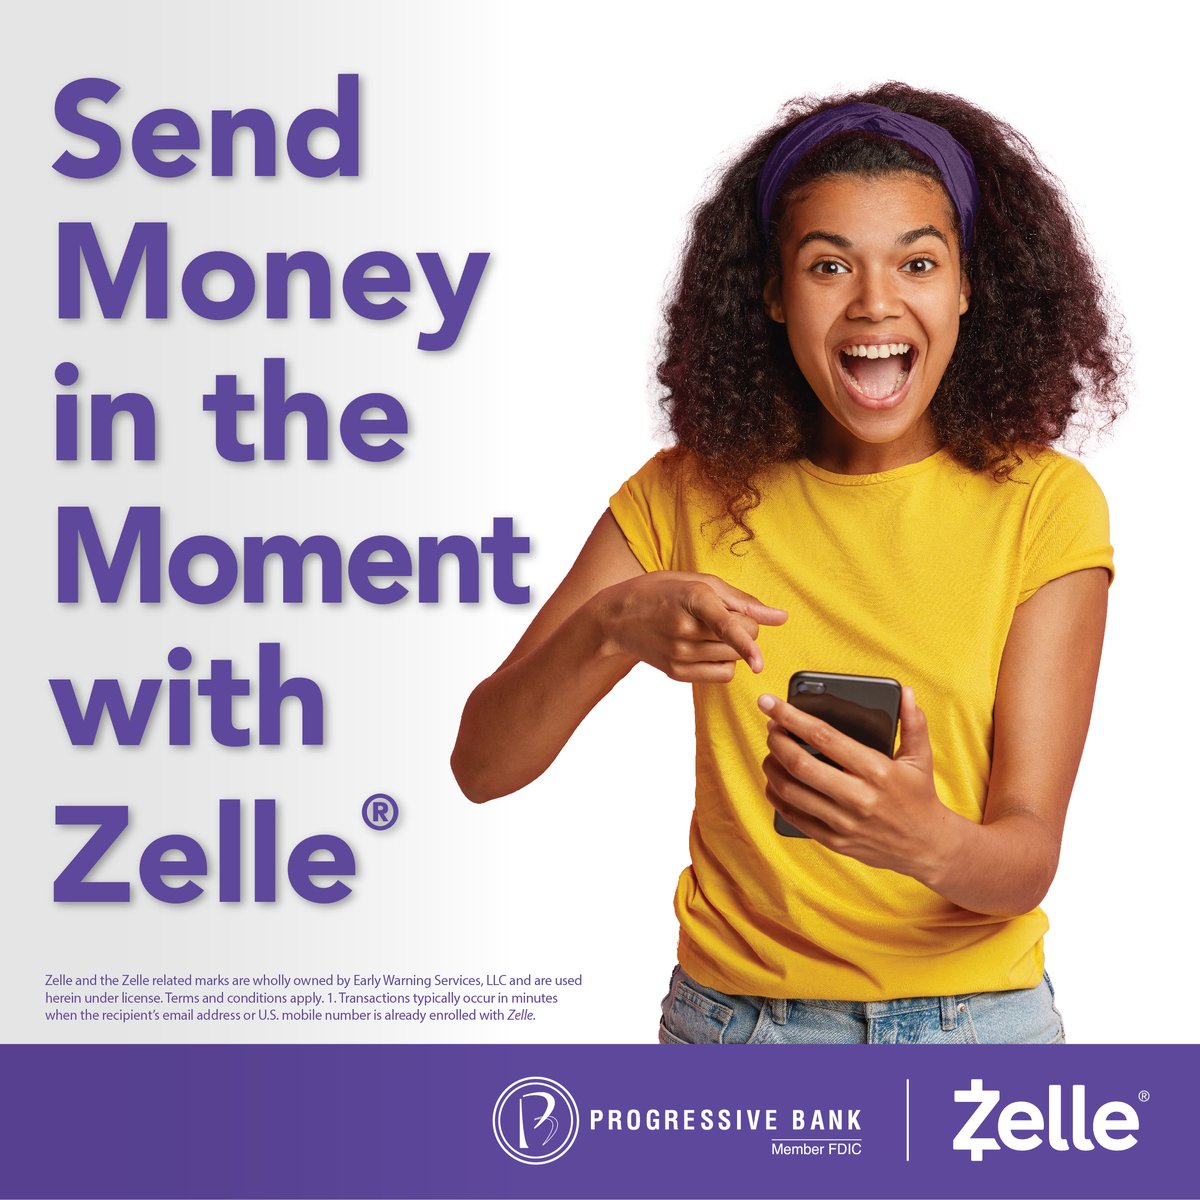 Fast, Safe & Easy Money Transfer with Zelle! 

Log in to your PB Mobile app or Online today and experience an easy way to send money to friends and family.

 Learn more: trst.in/Xu2Omt

#ProgressiveBank #Zelle